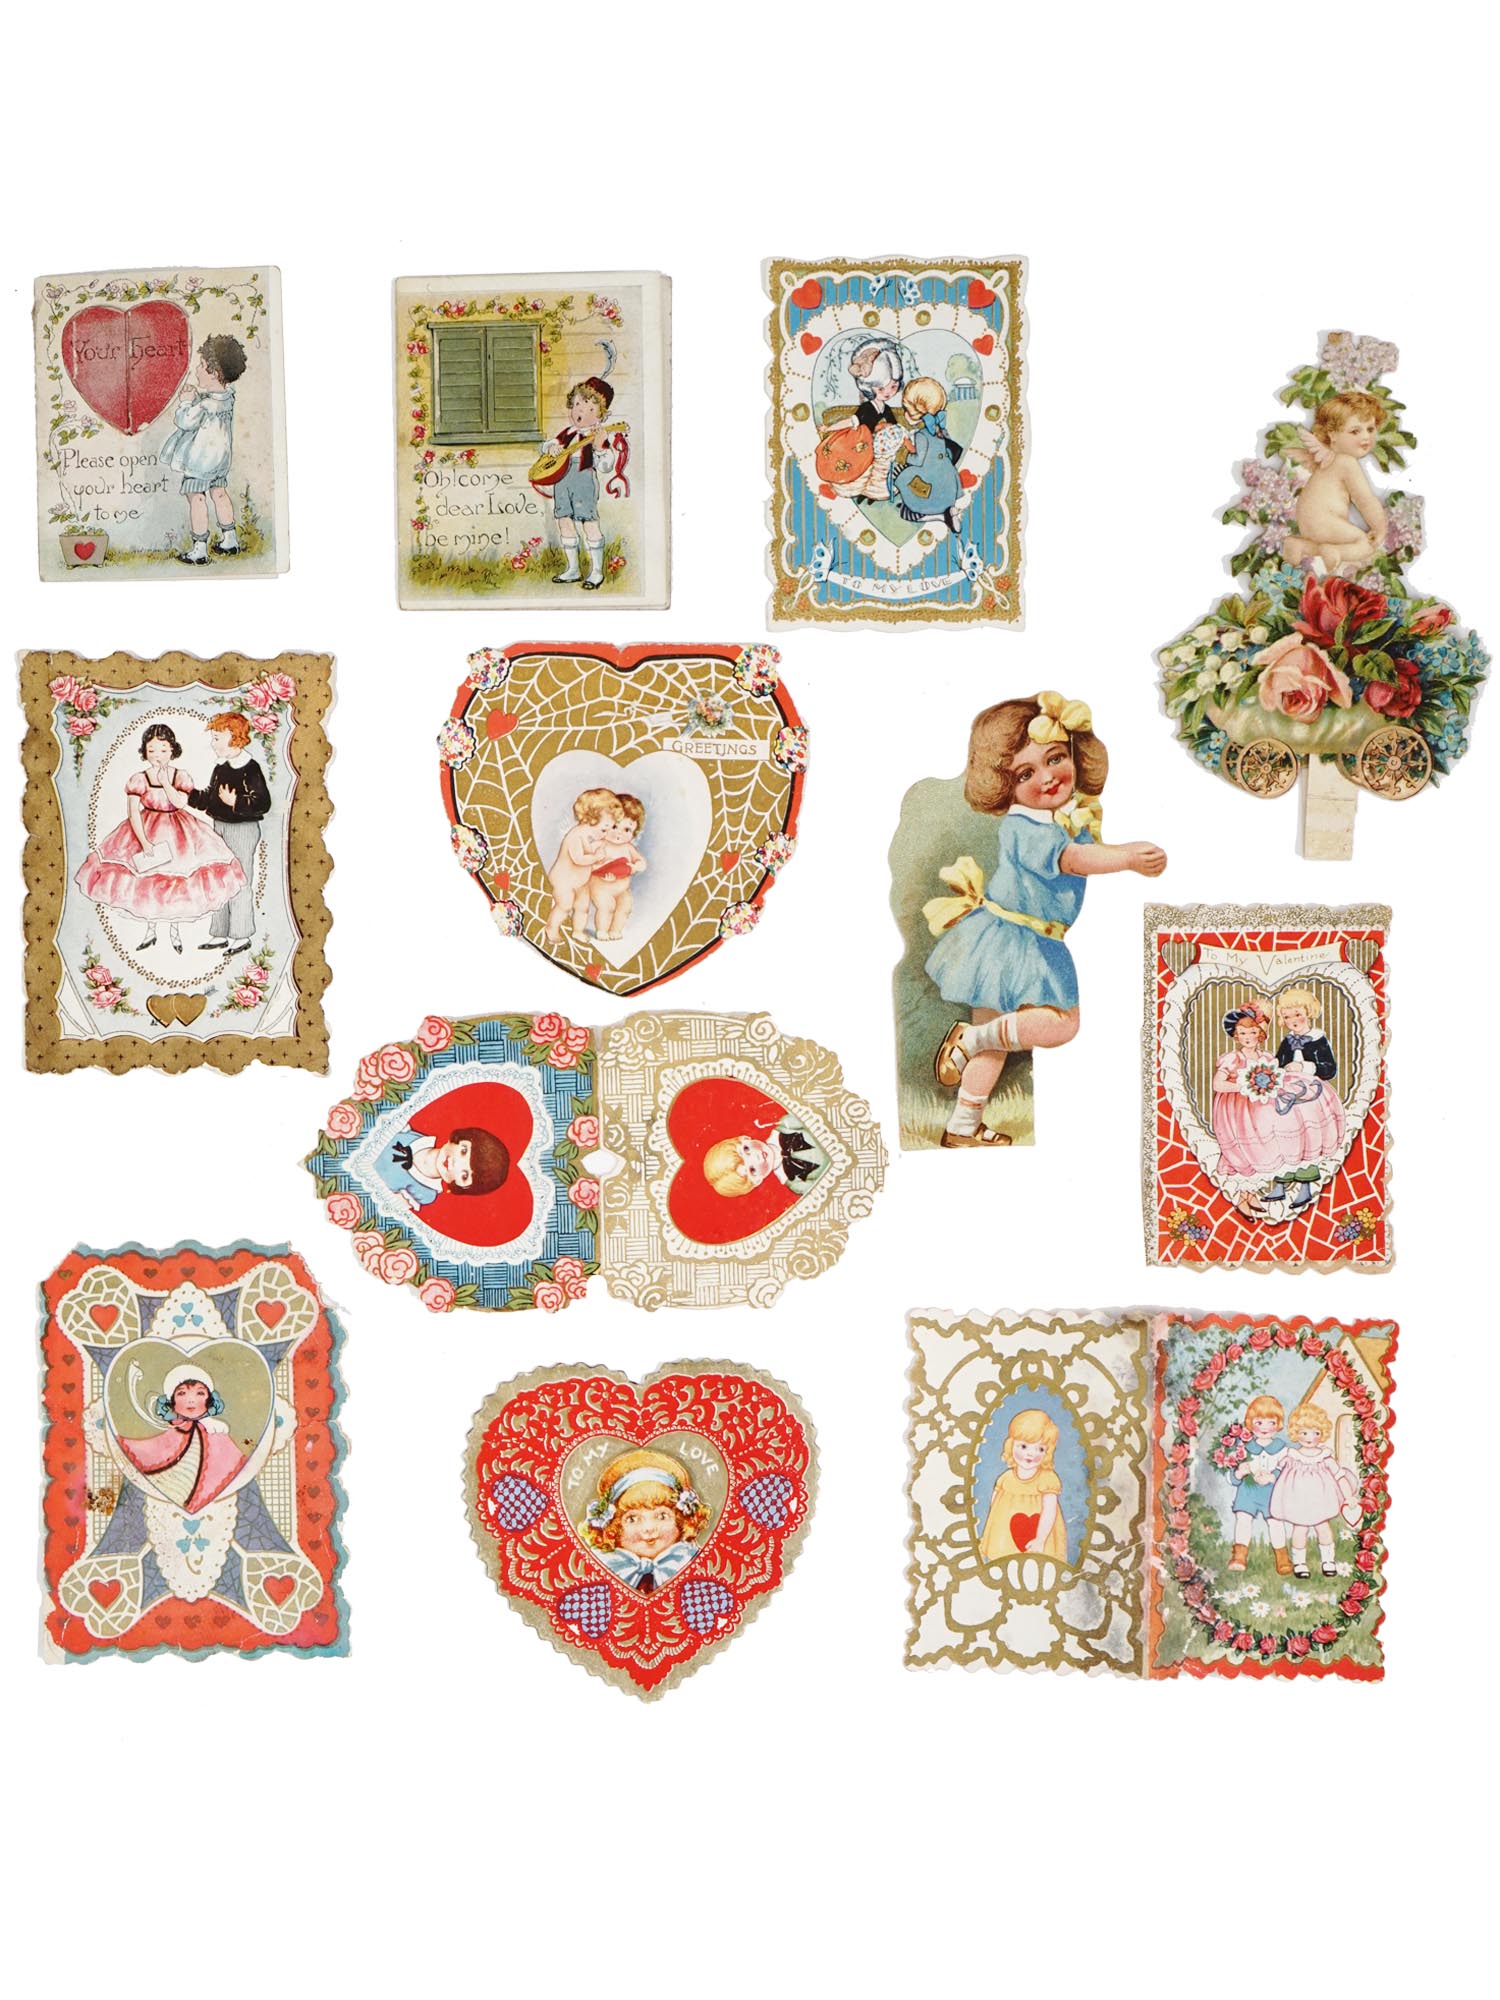 ANTIQUE VALENTINES DAY CARDS COLLECTION IN ALBUM PIC-7